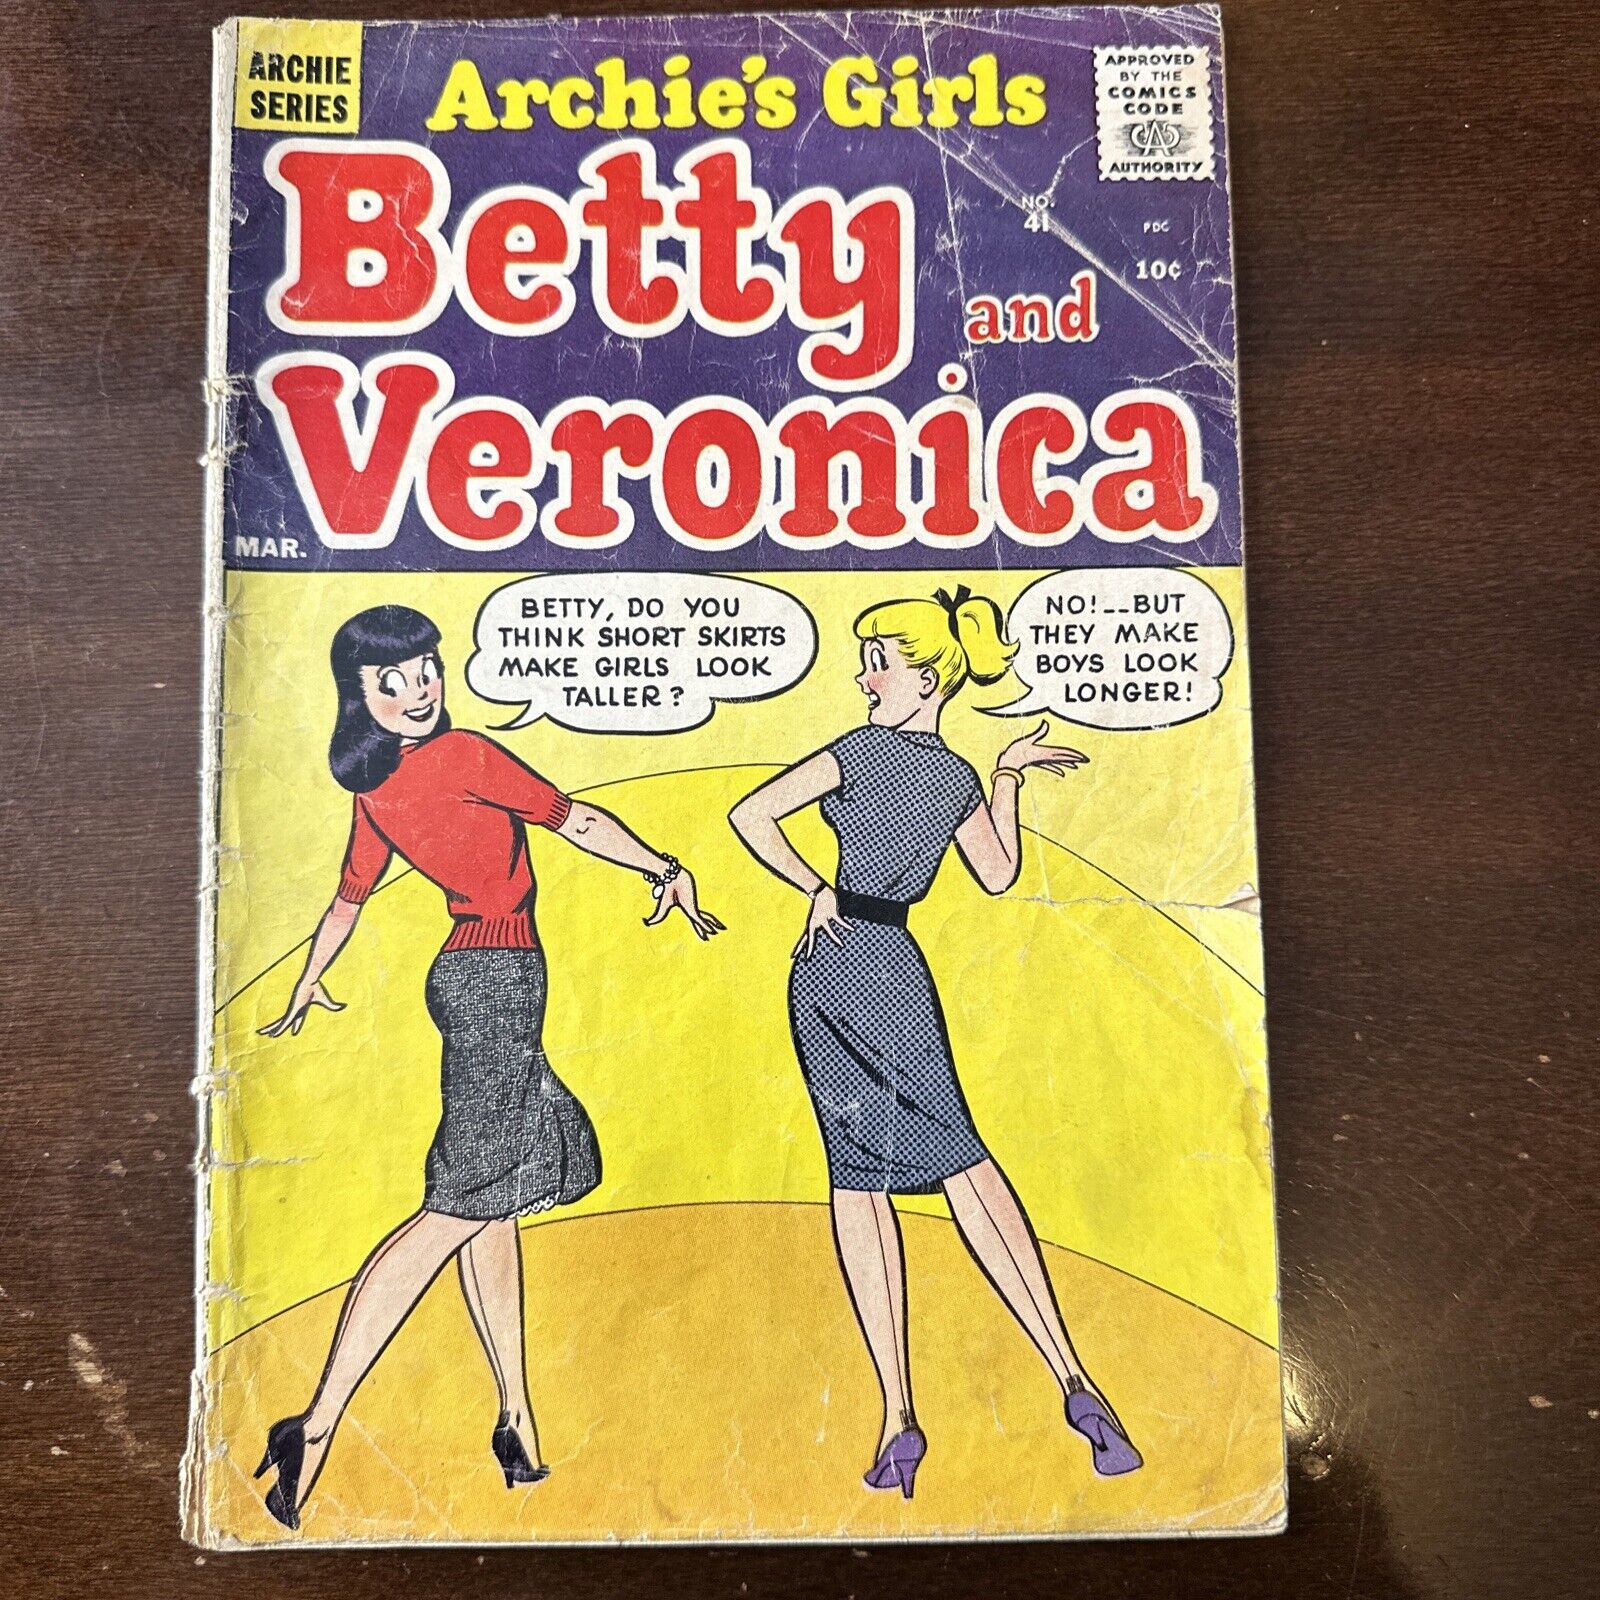 Archie\'s Girls Betty and Veronica #41 (1959) - Betty Veronica Short Skirt Cover